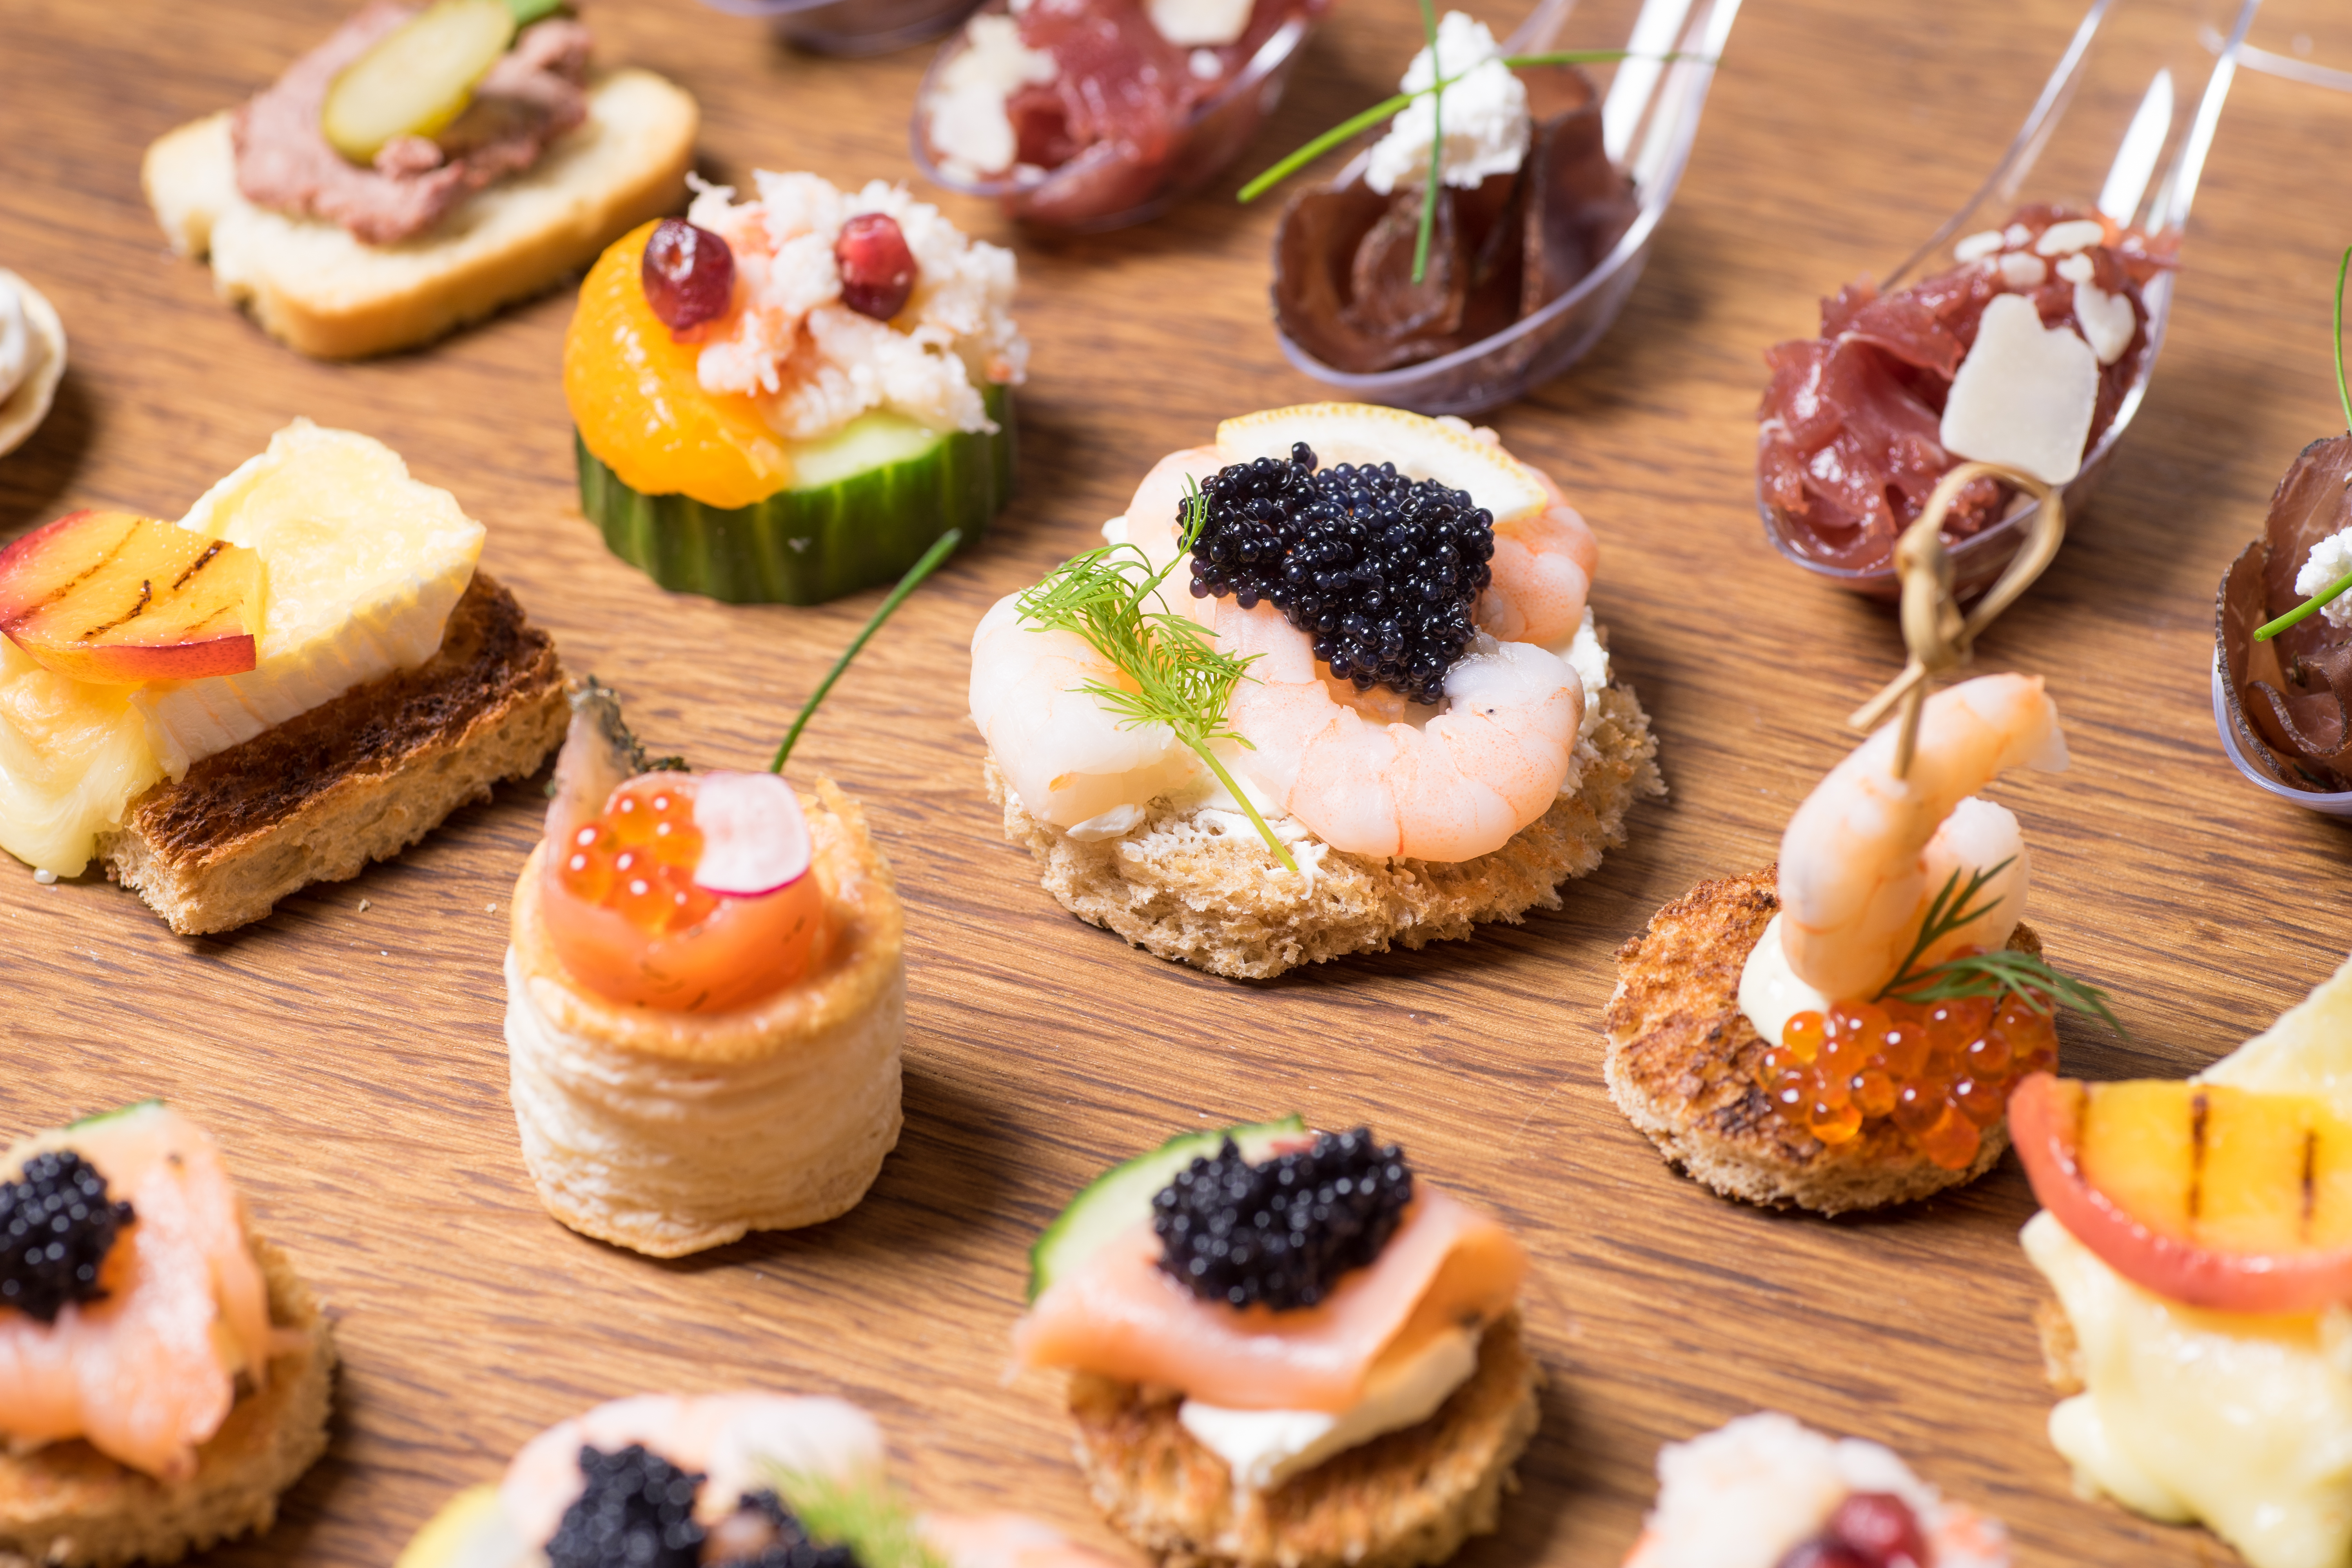 Exquisite selection of luxury canapes, appetizer ready to be served for events, celebrations or other occasion